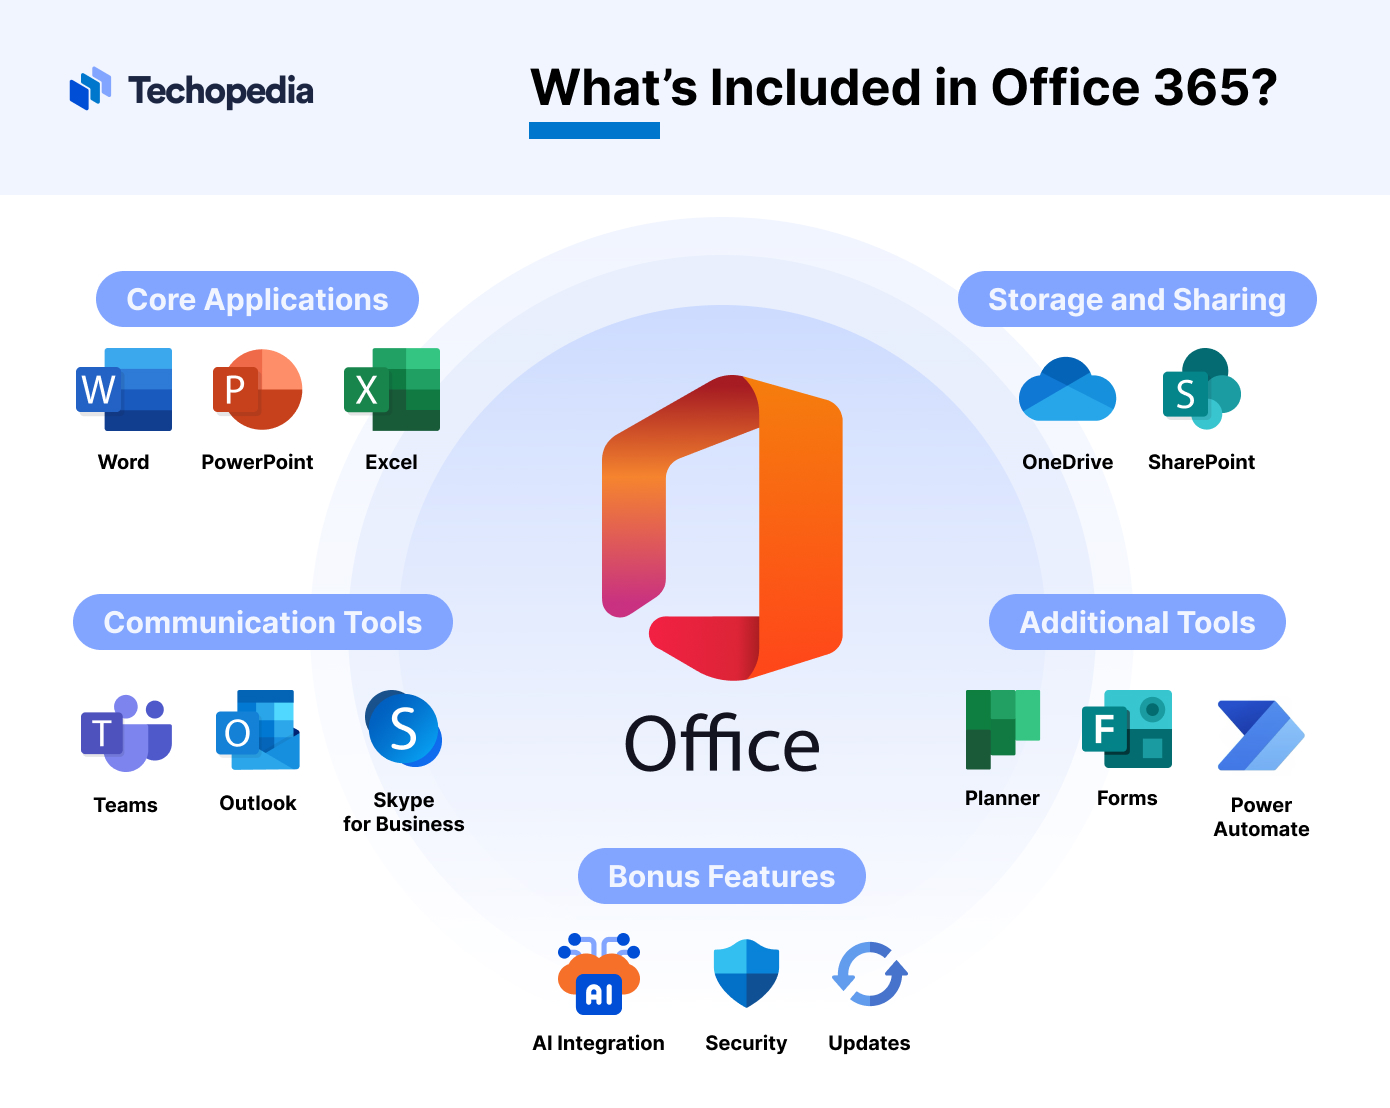 What's Included in Office 365?